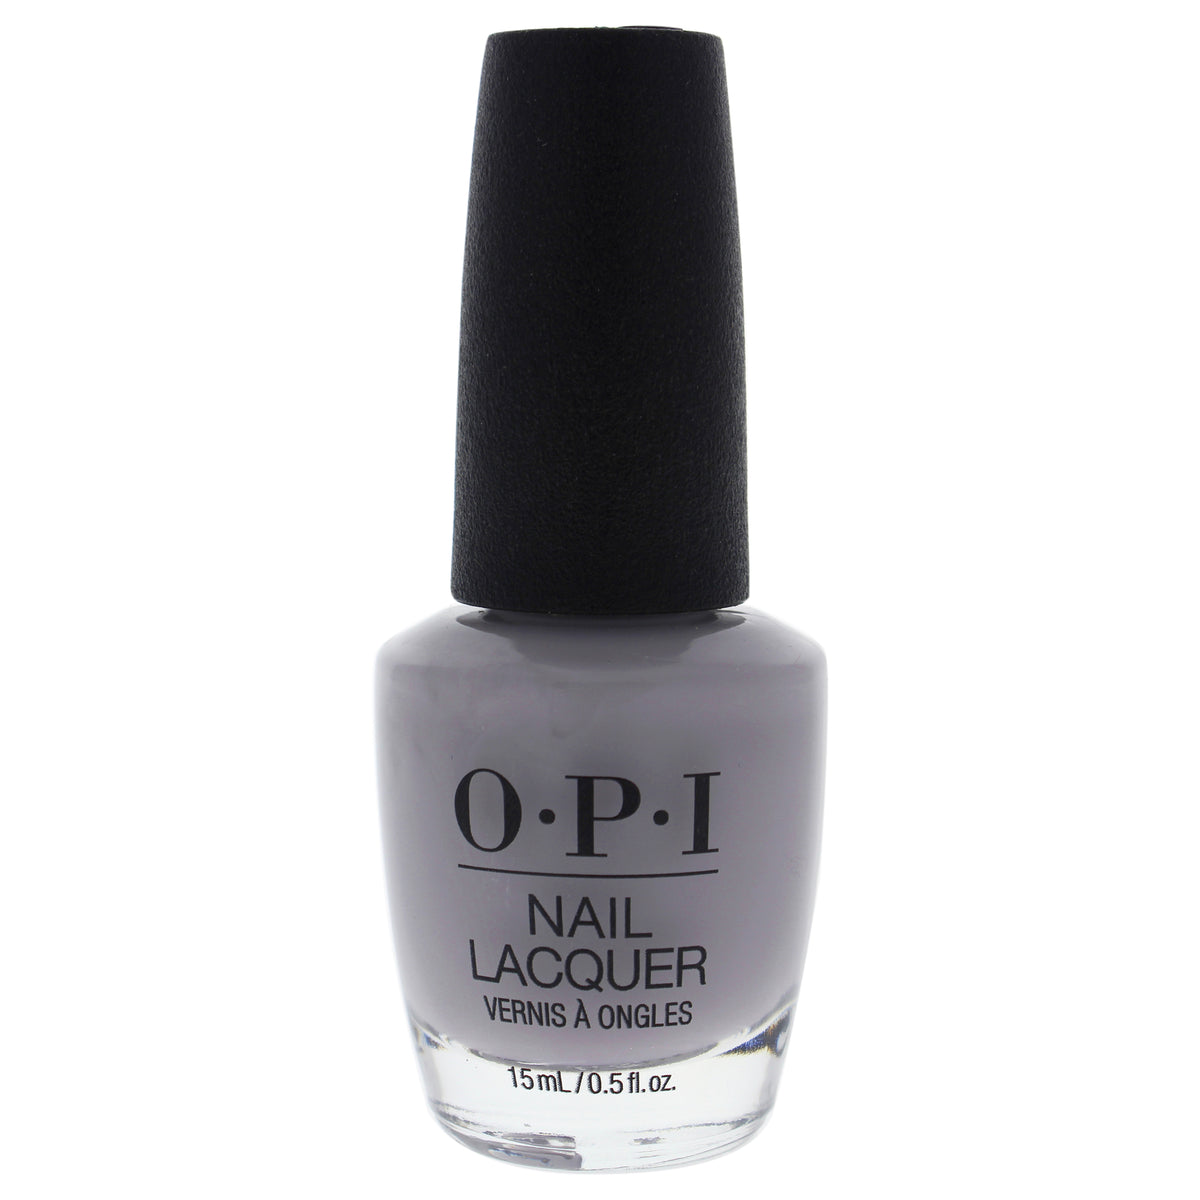 Nail Lacquer - NL SH5 Engage-Meant To Be by OPI for Women - 0.5 oz Nail Polish